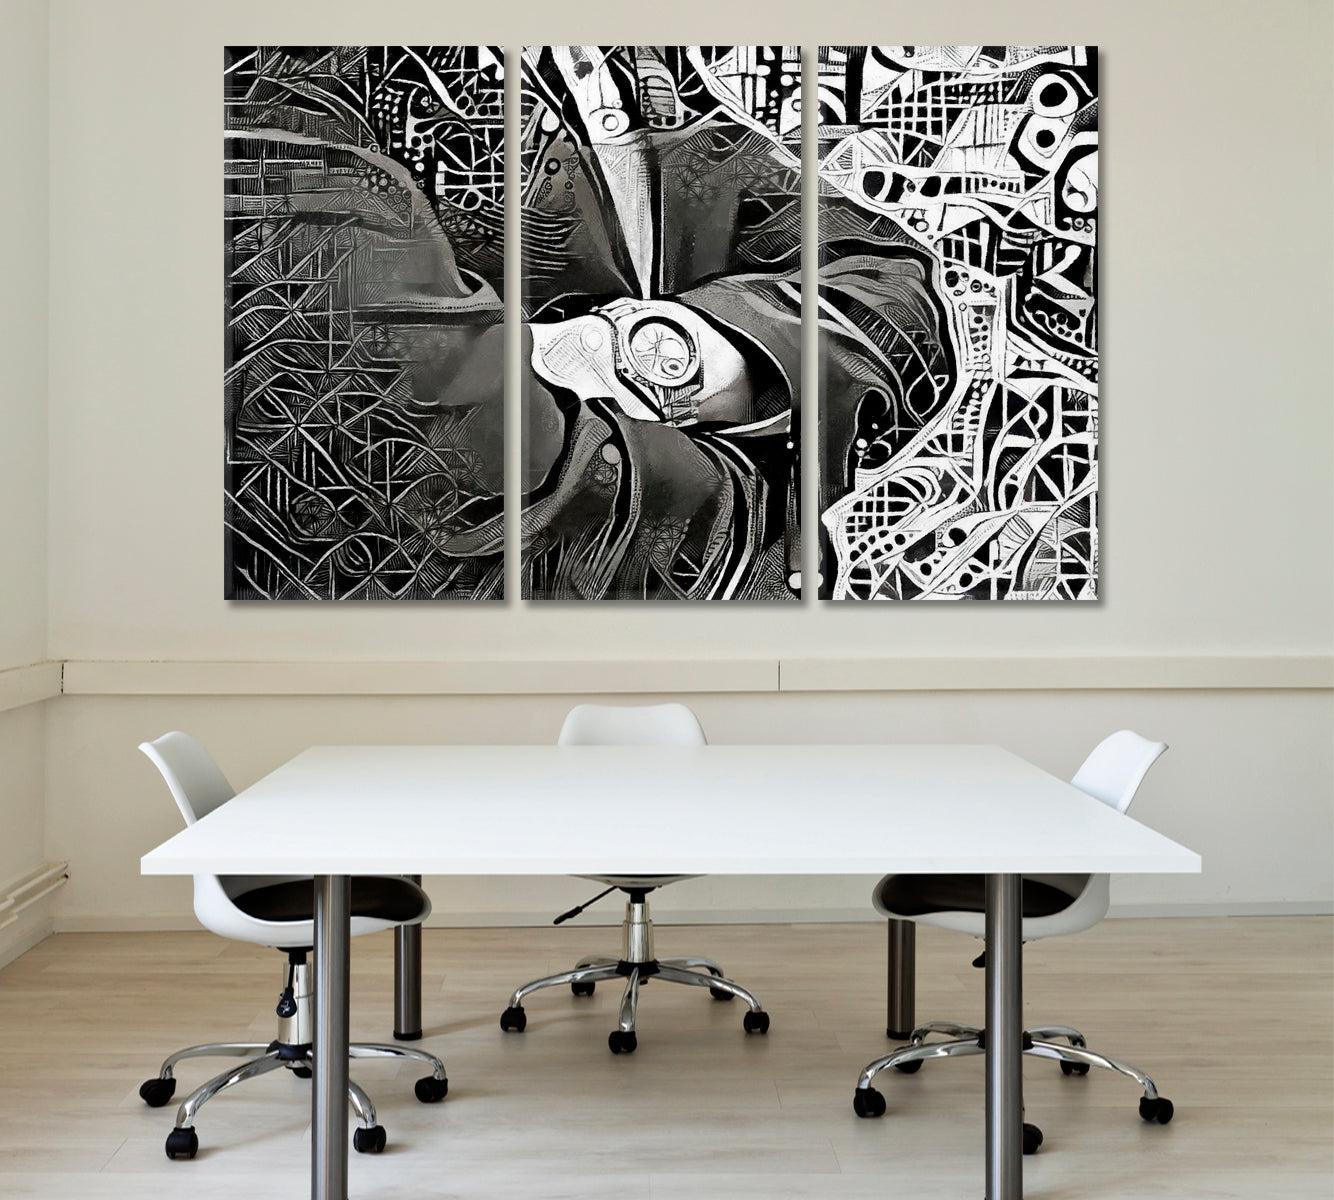 MAN WITH WATCH Abstract Geometric Modern Cubism Futurism Office Wall Art Canvas Print Artesty 3 panels 36" x 24" 